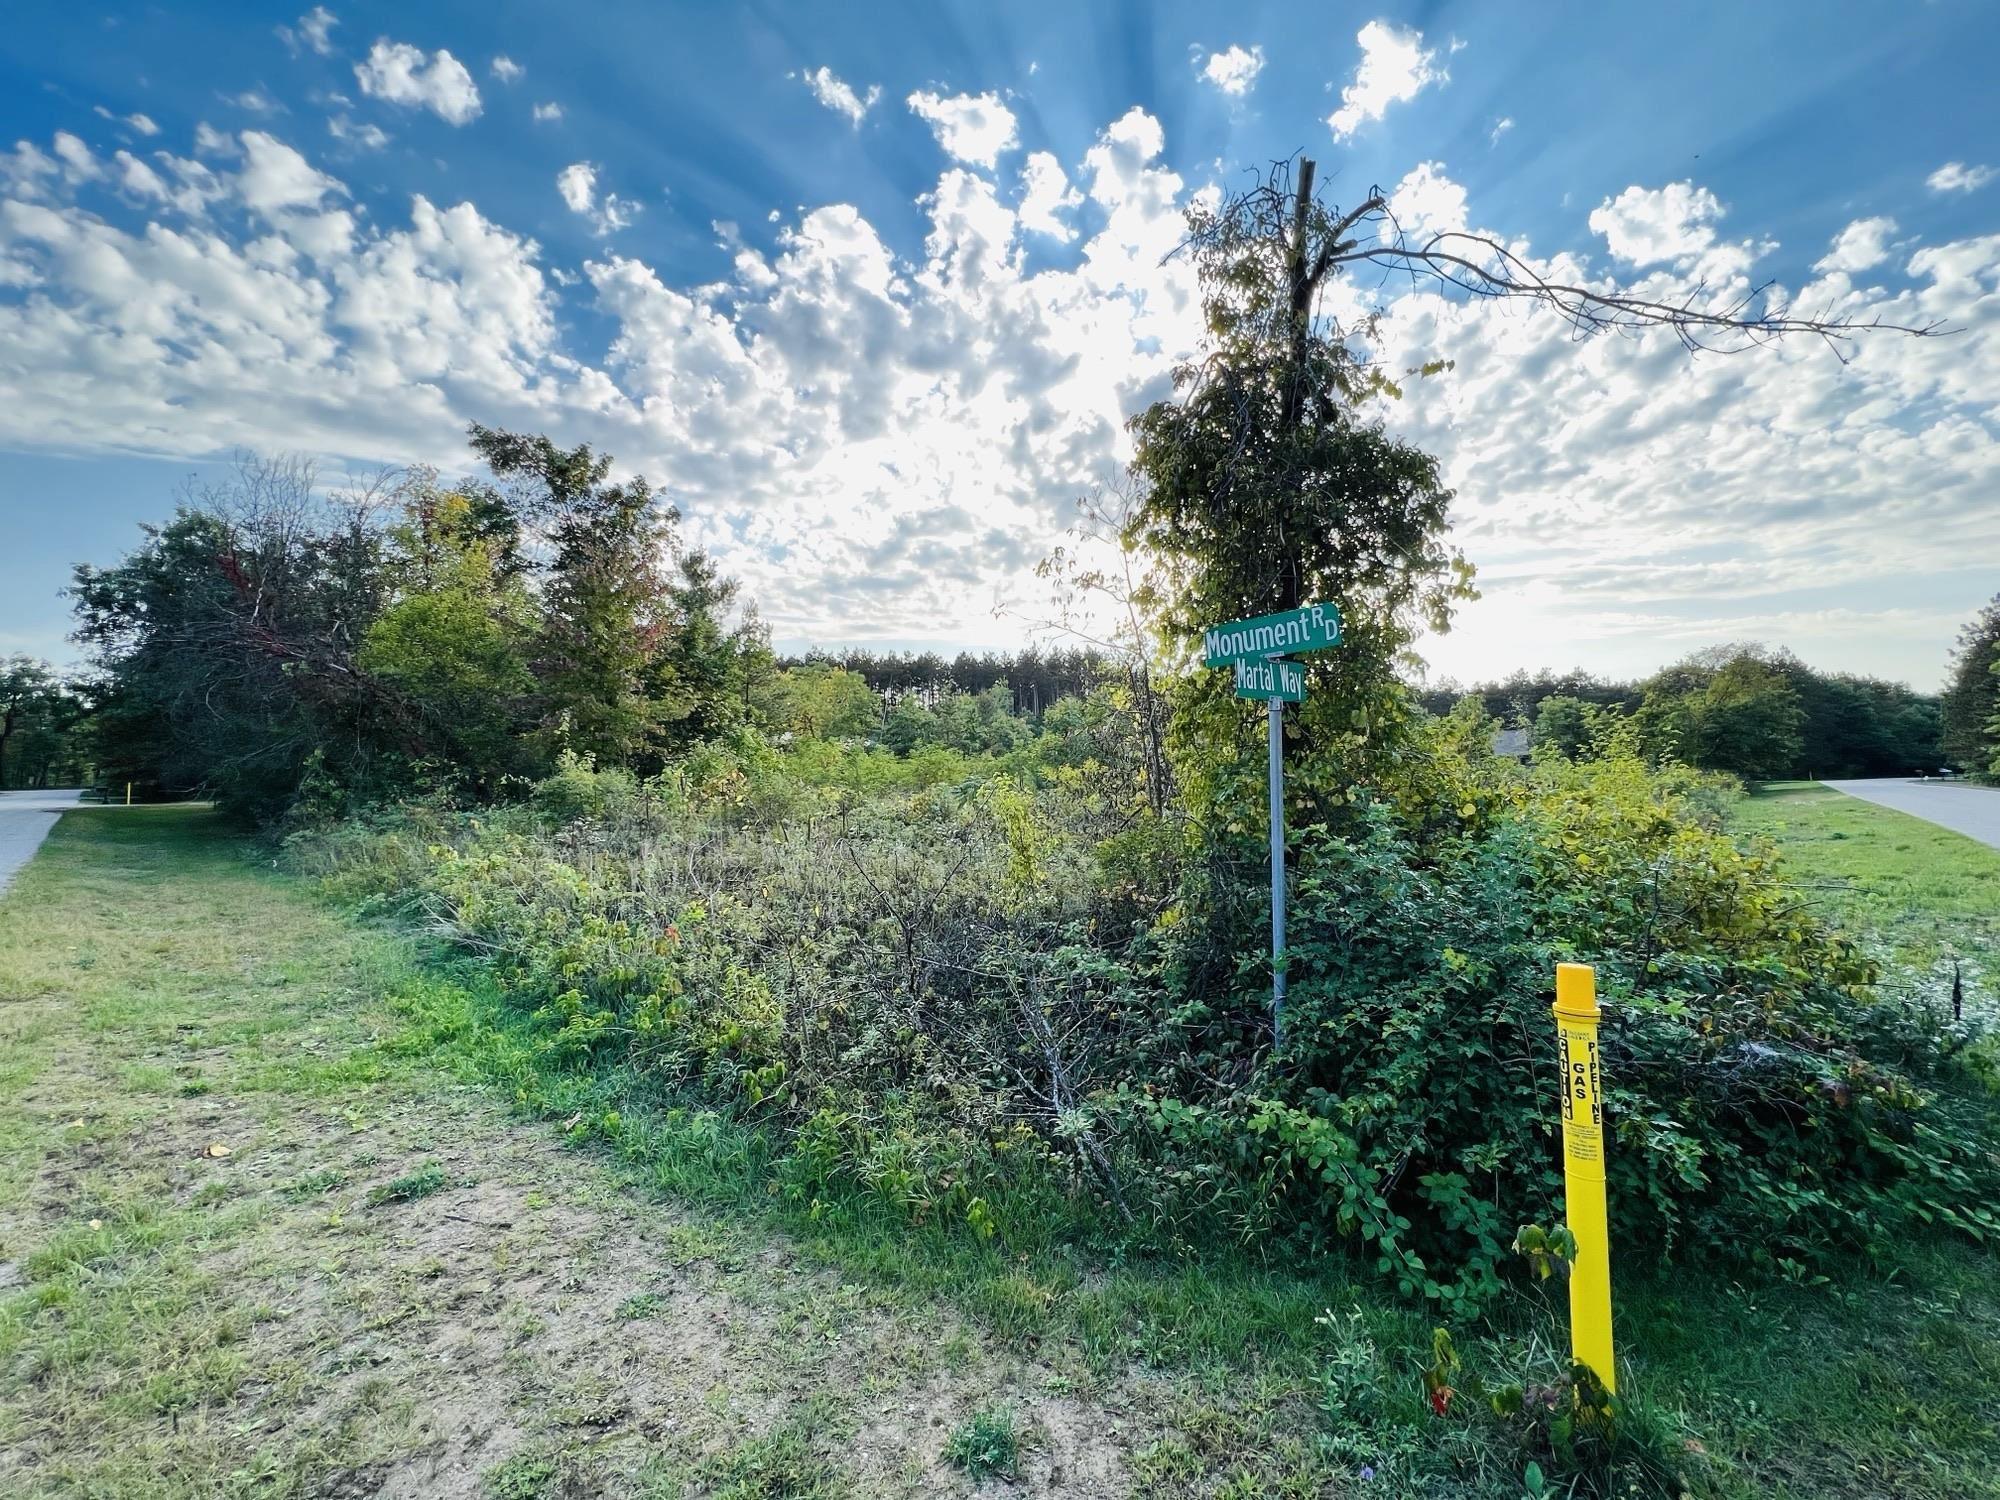 Property Image for Lot 42 Monument Road